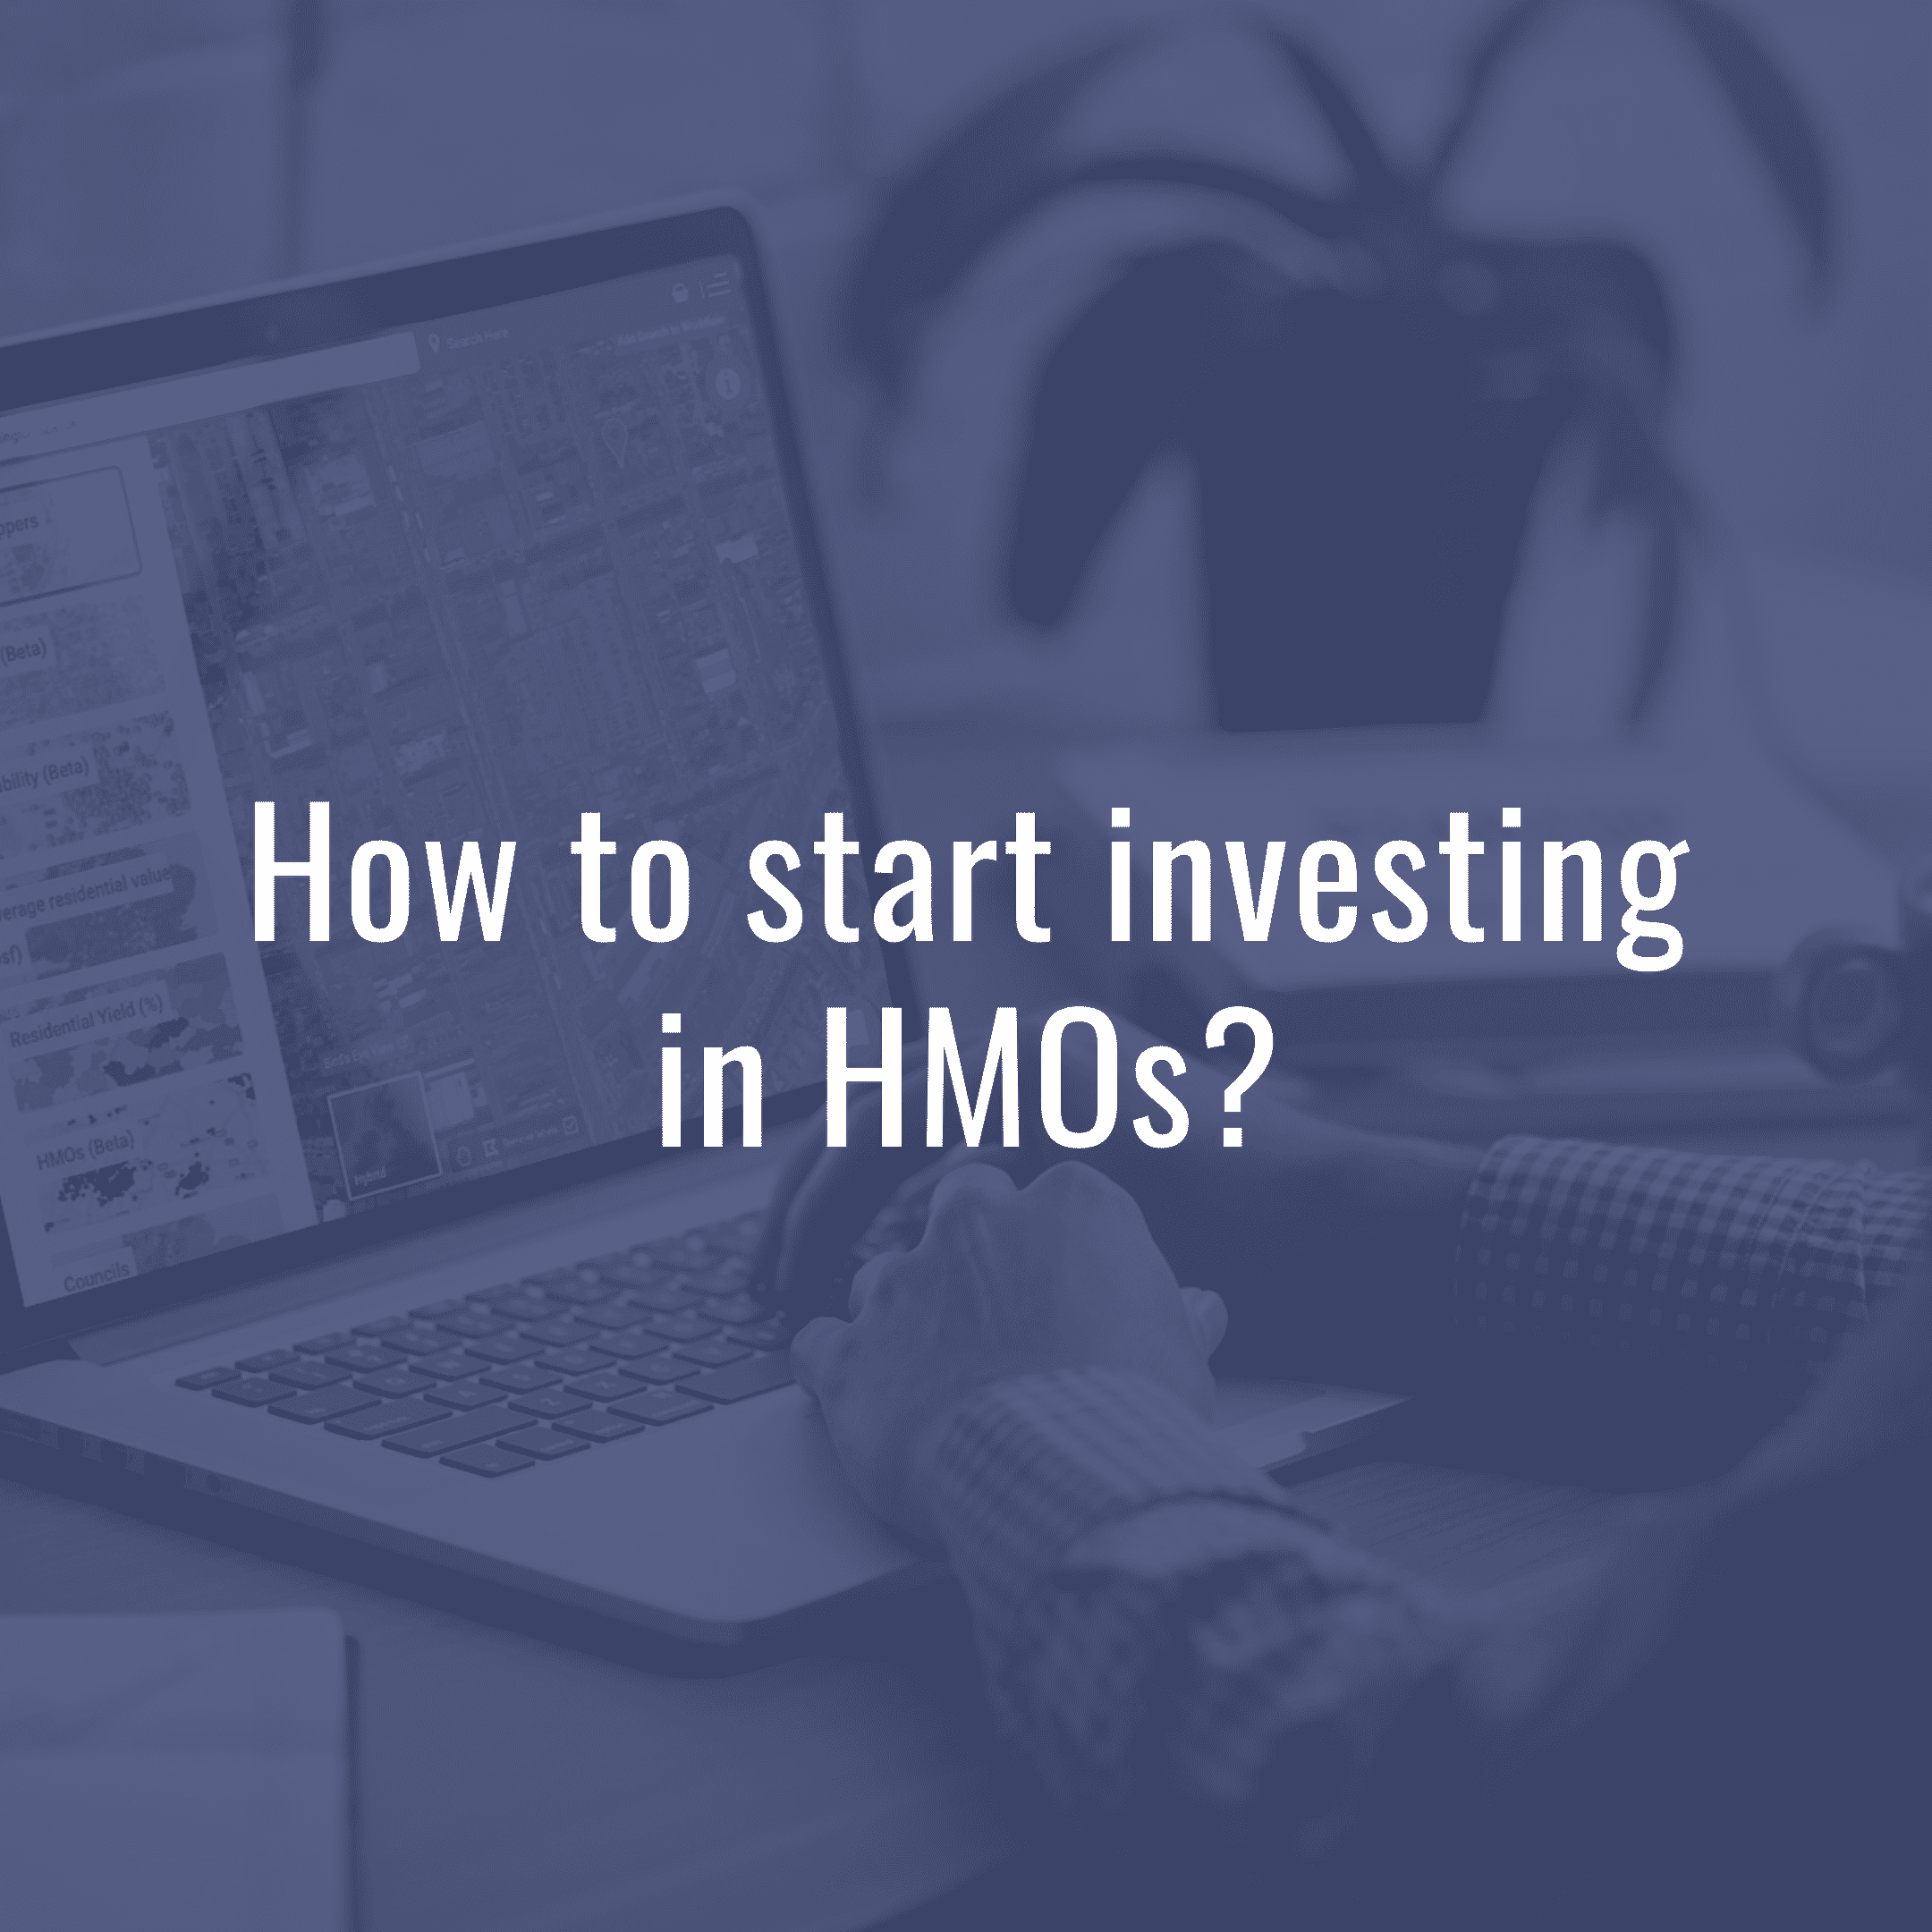 How to start investing in HMOs?